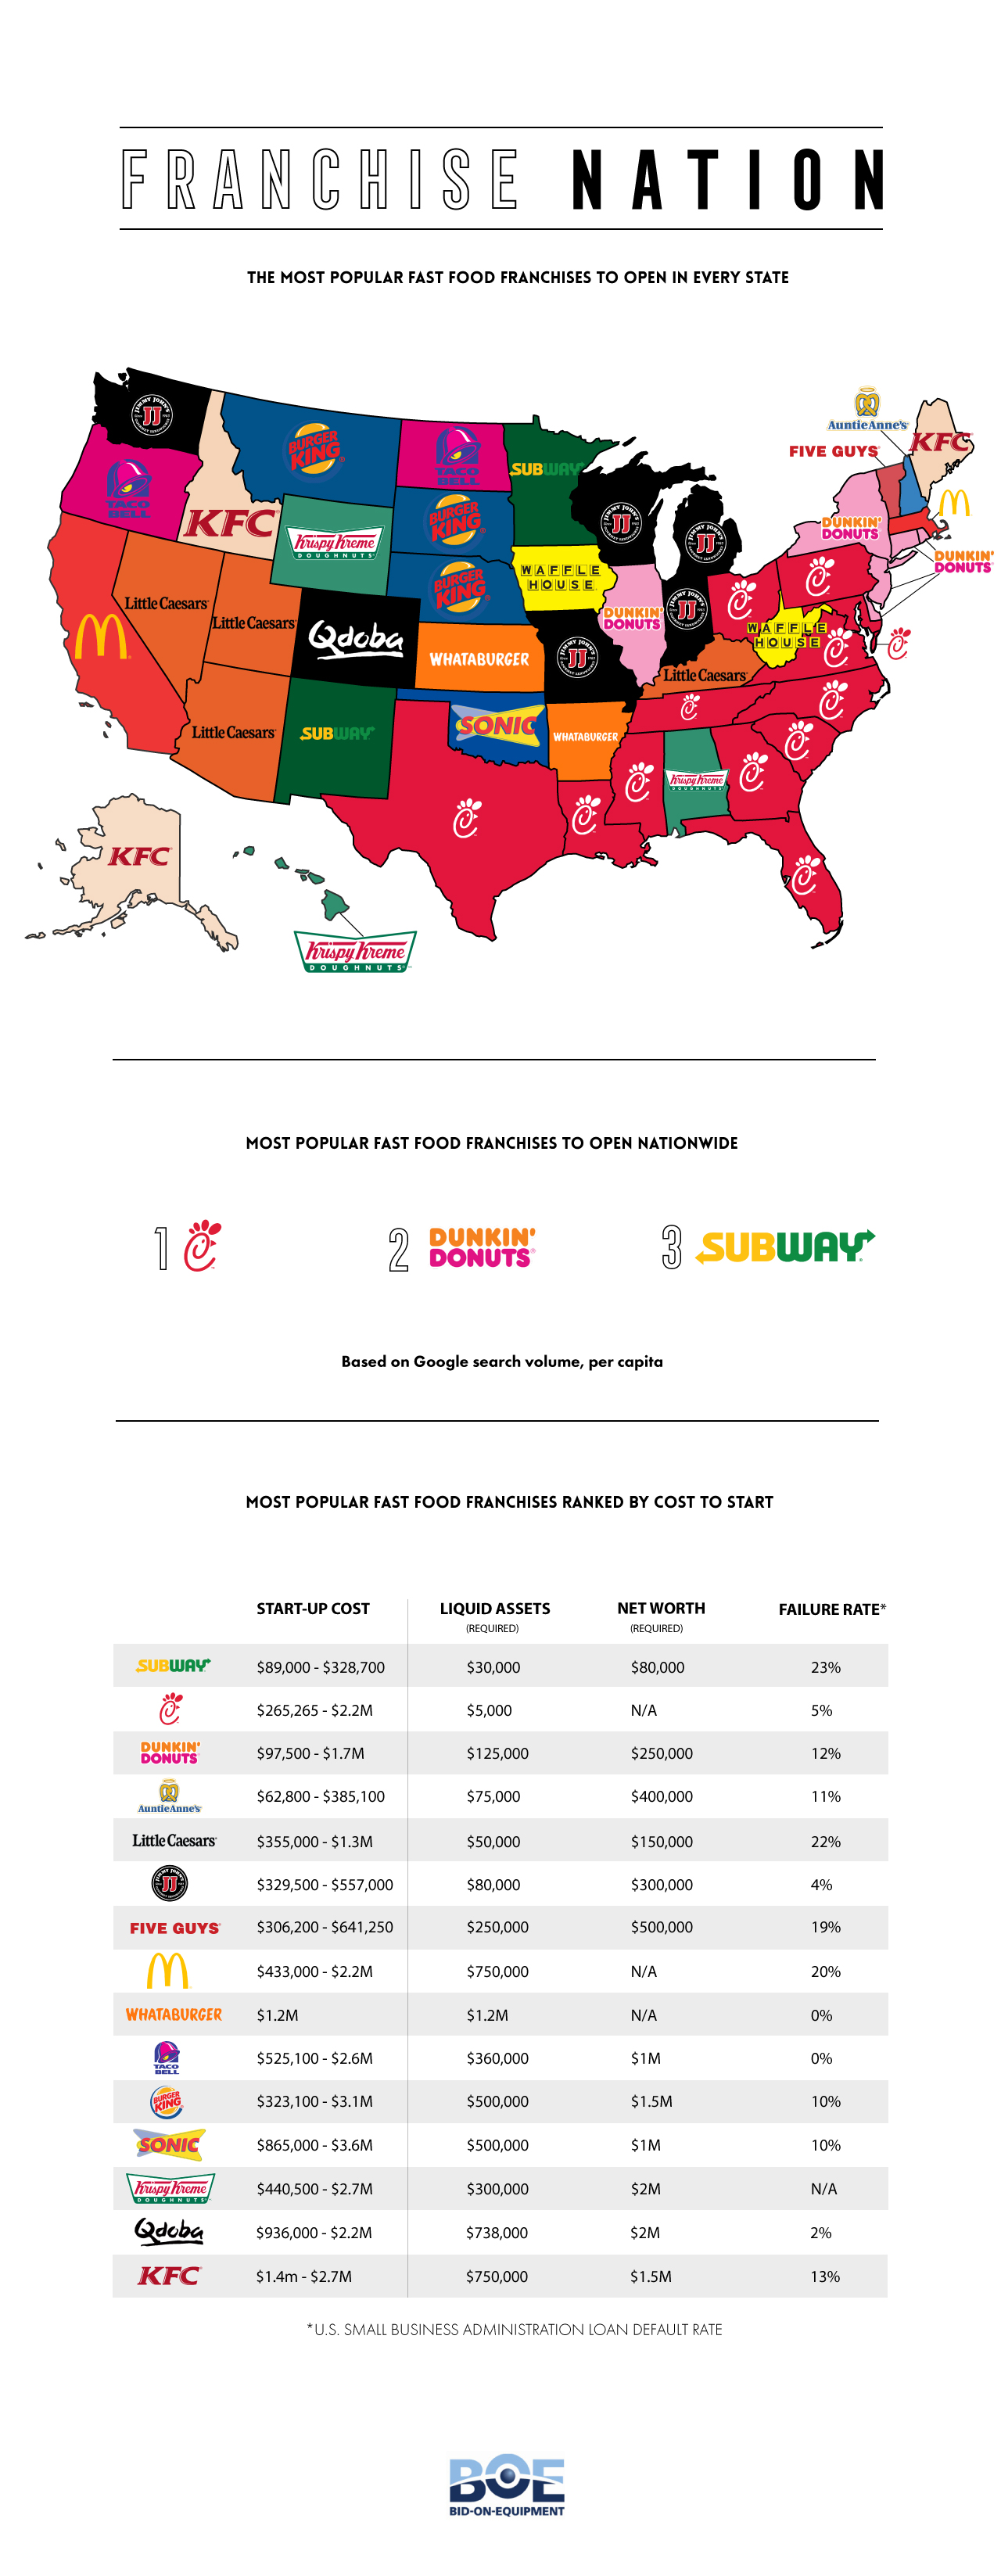 Most Googled Fast Food Franchises to Open